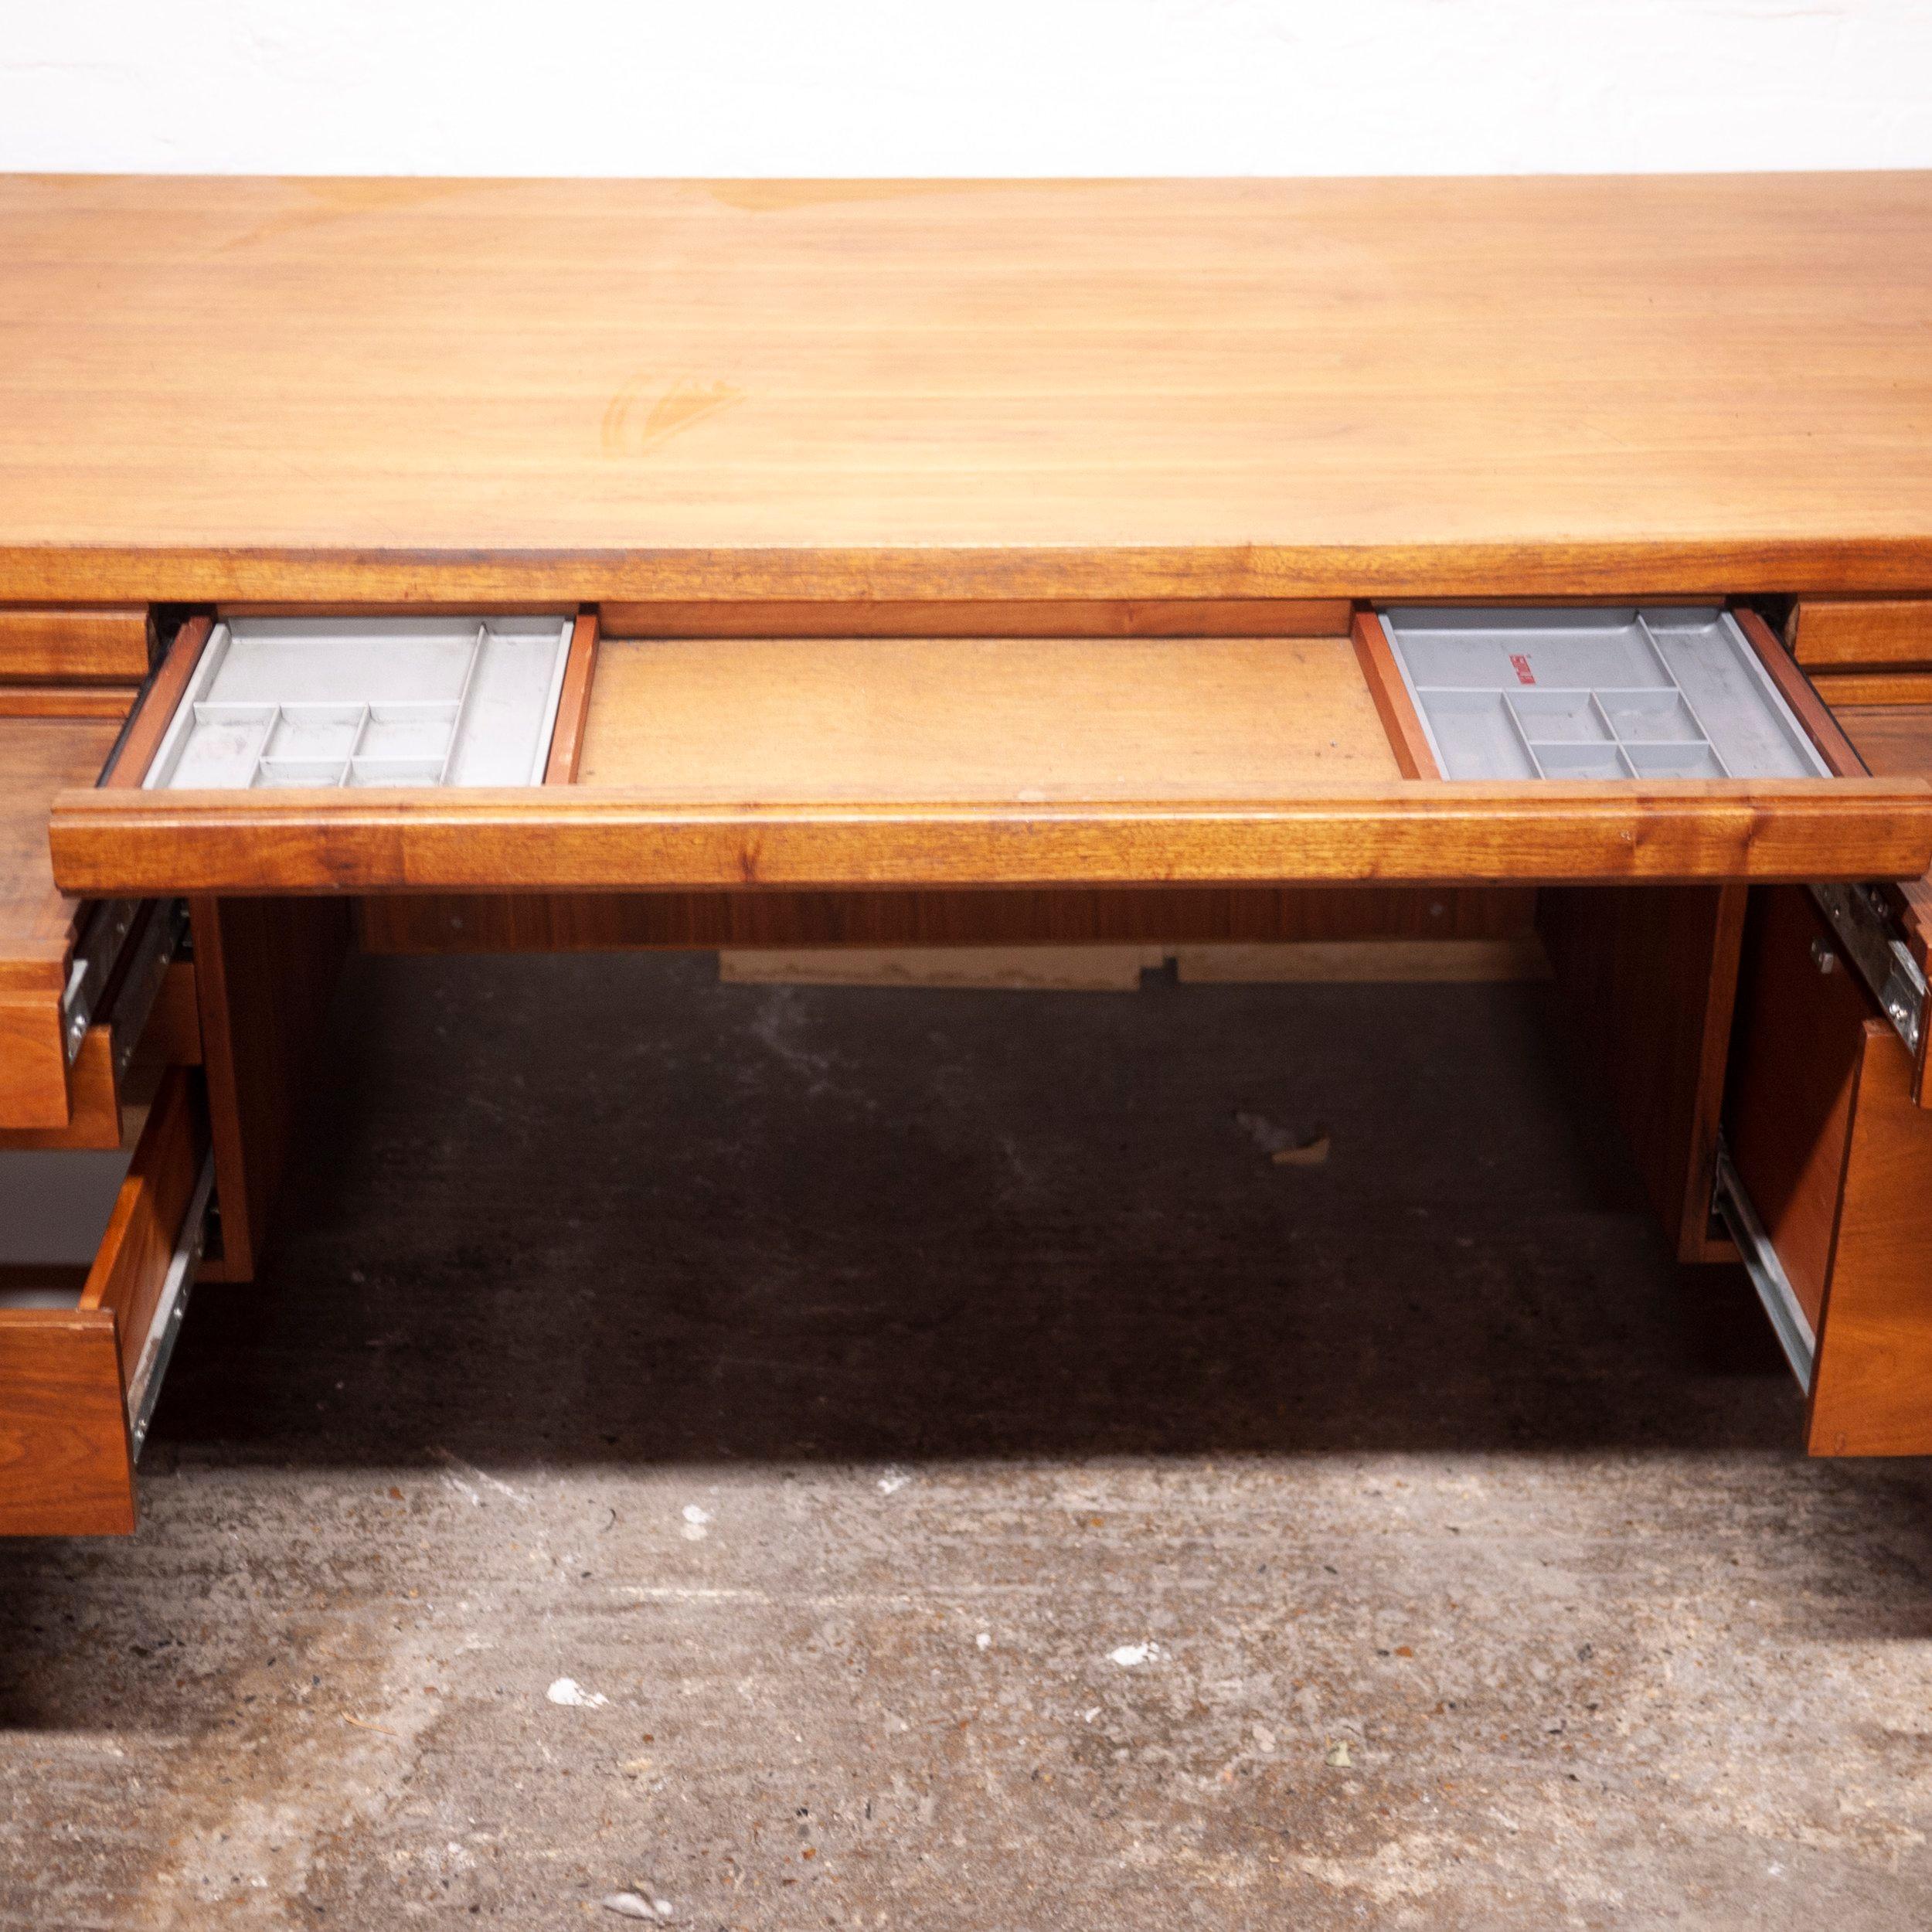 A walnut executive Danish designed desk by Jens Risom and manufactured in the U.S.A by by Jens Risom Design.

Designer - Jens Risom

Manufacturer - Jens Risom Design

Design Period - 1960 to 1969

Country of Manufacture - U.S.A

Style - Vintage,